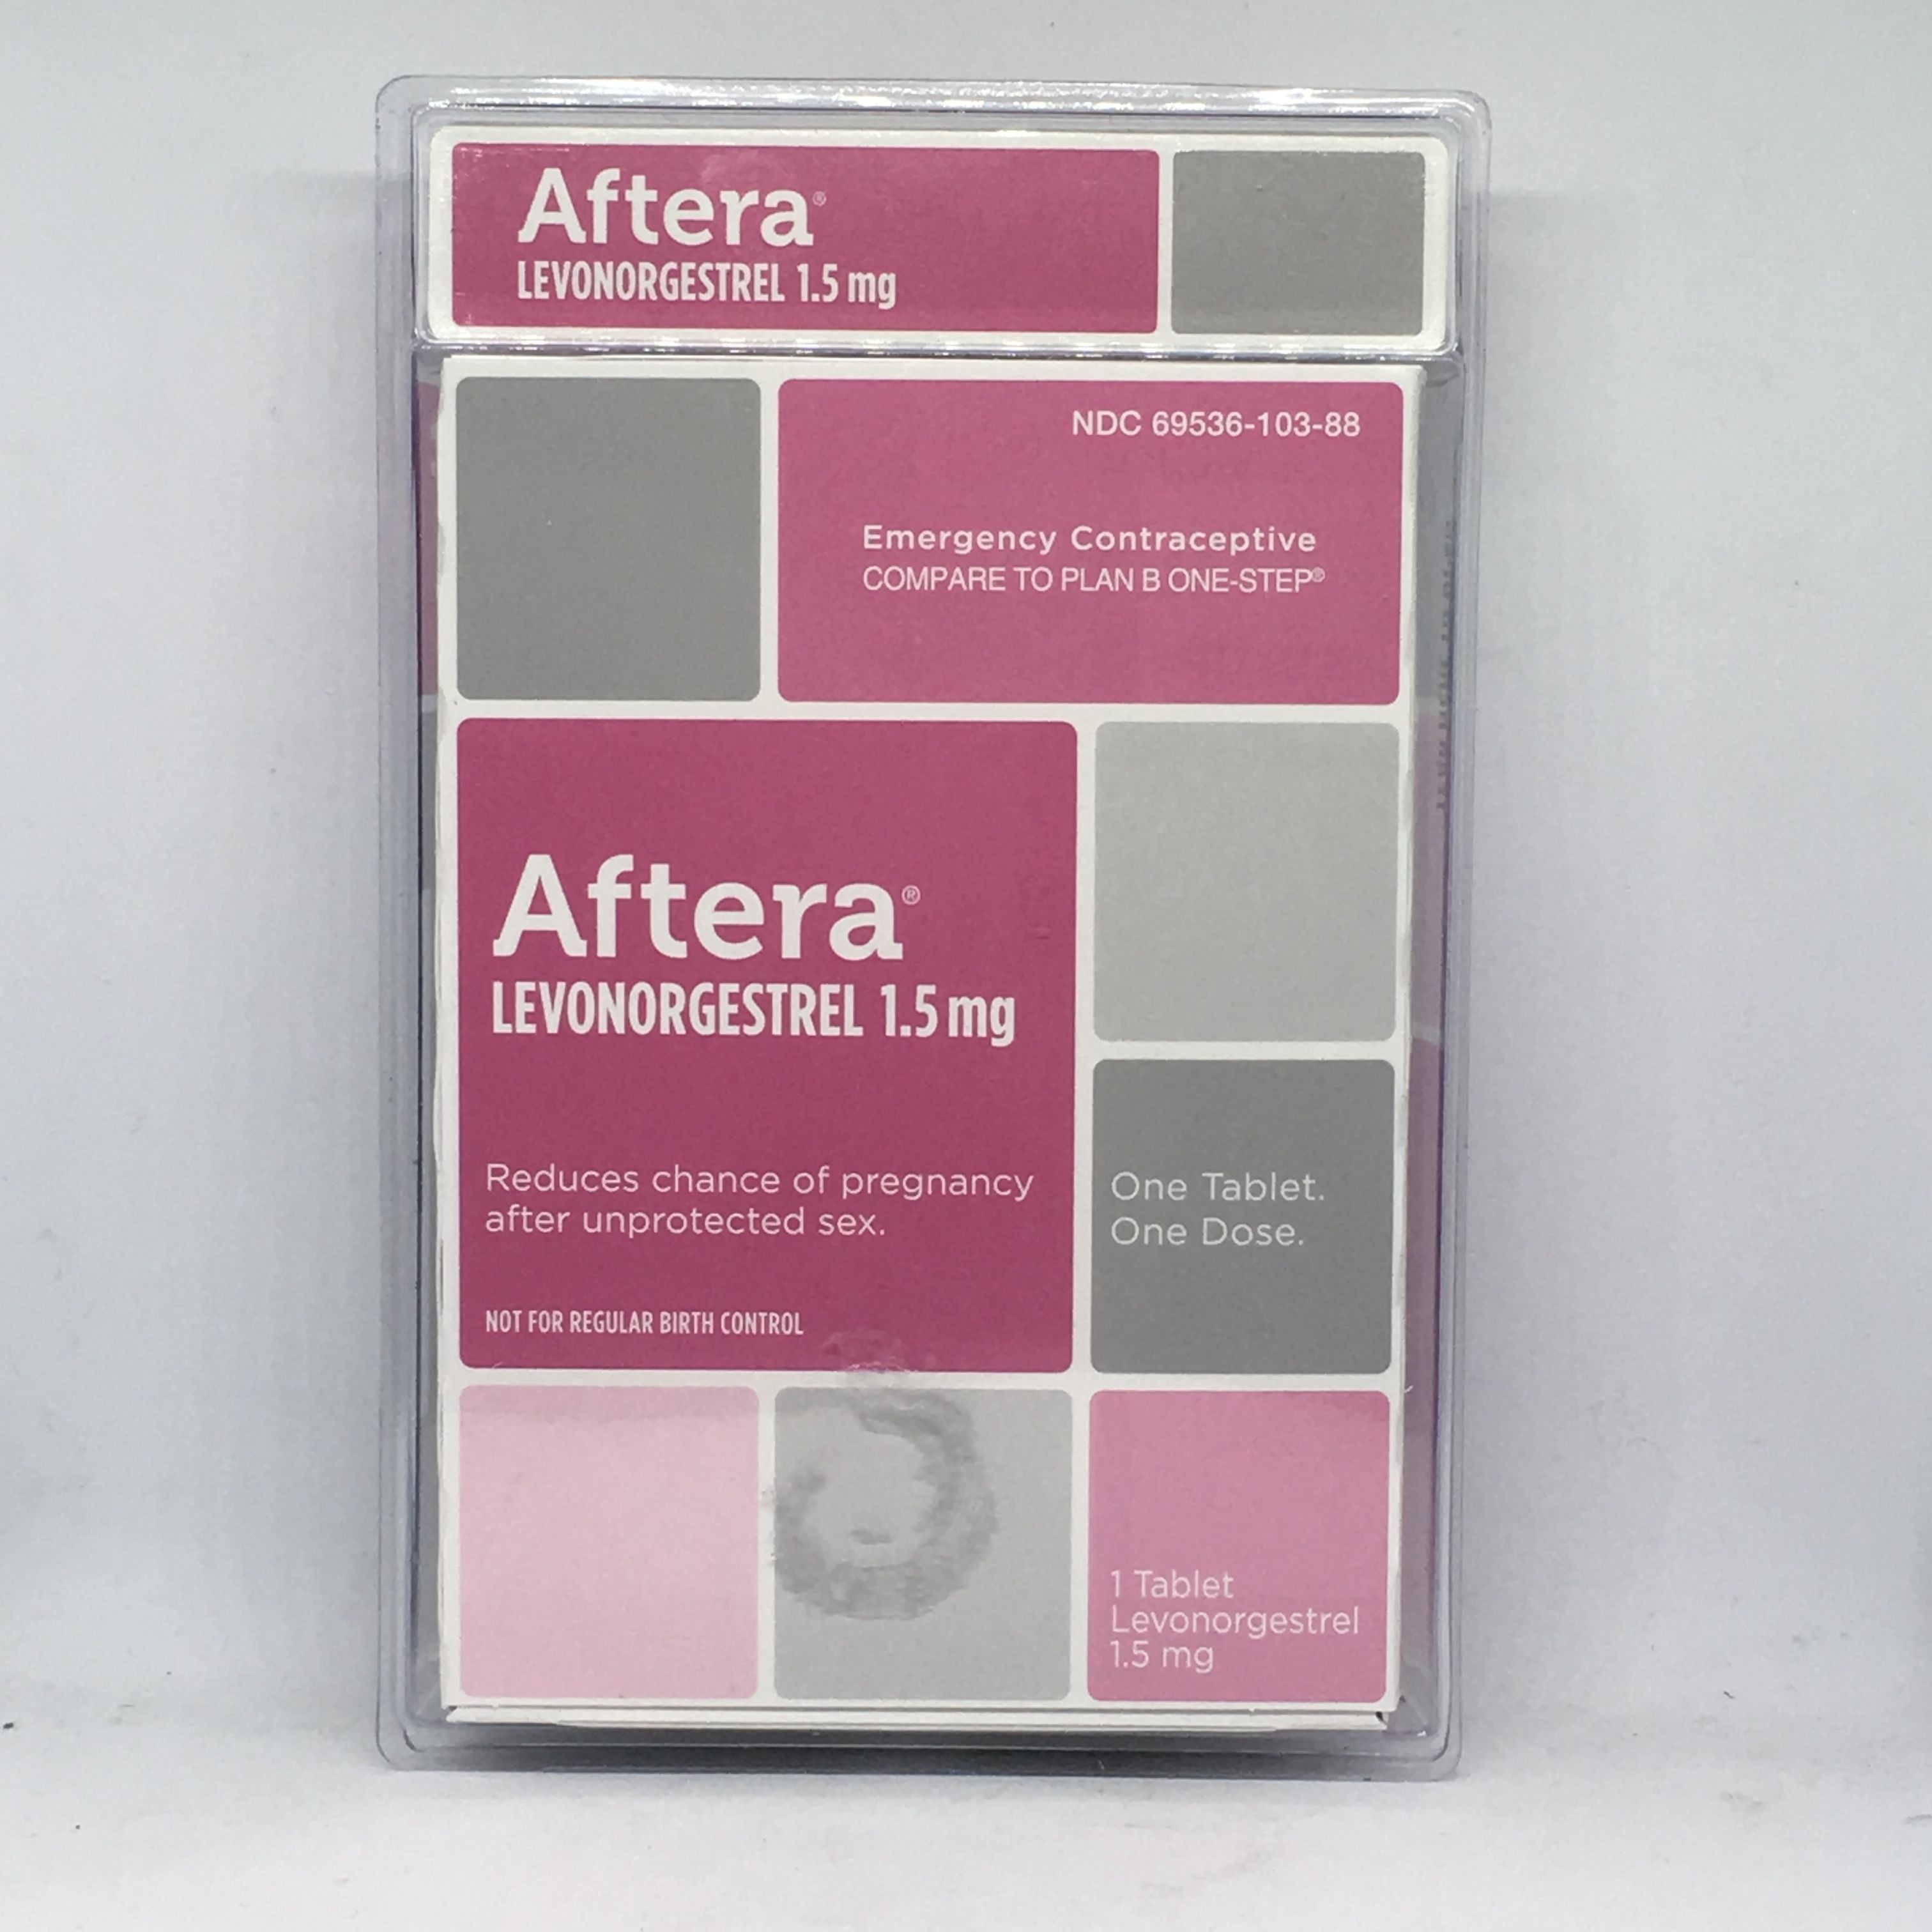 Aftera Emergency Contraceptive Compare to Plan B One Step One Tablet